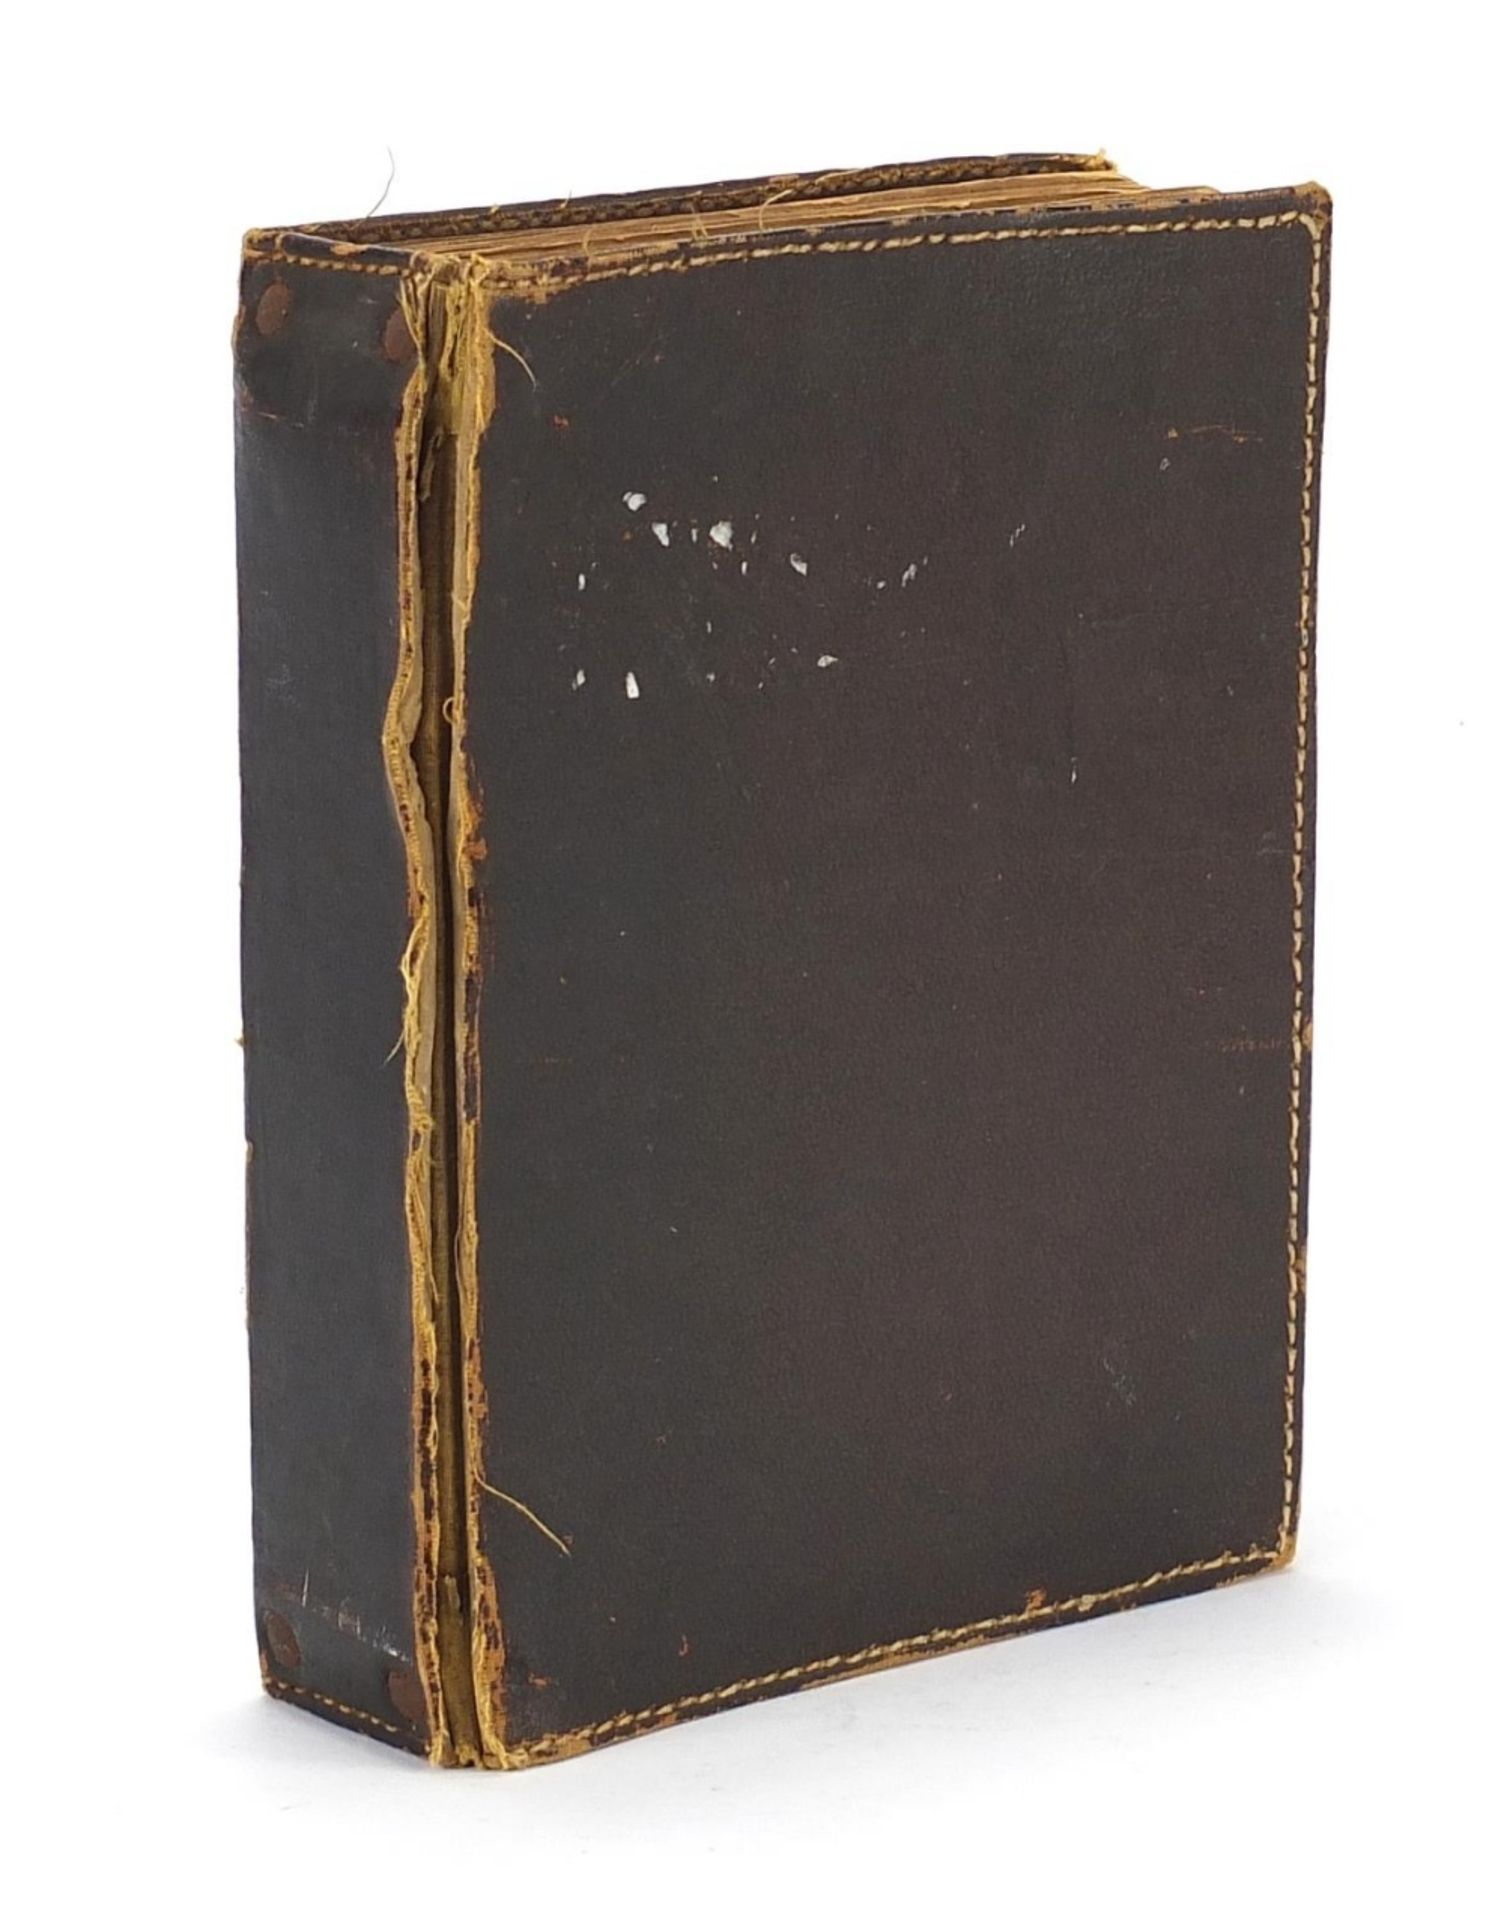 Mein Kampf by Adolf Hitler, unexpurgated edition arranged in a binder : For Further Condition